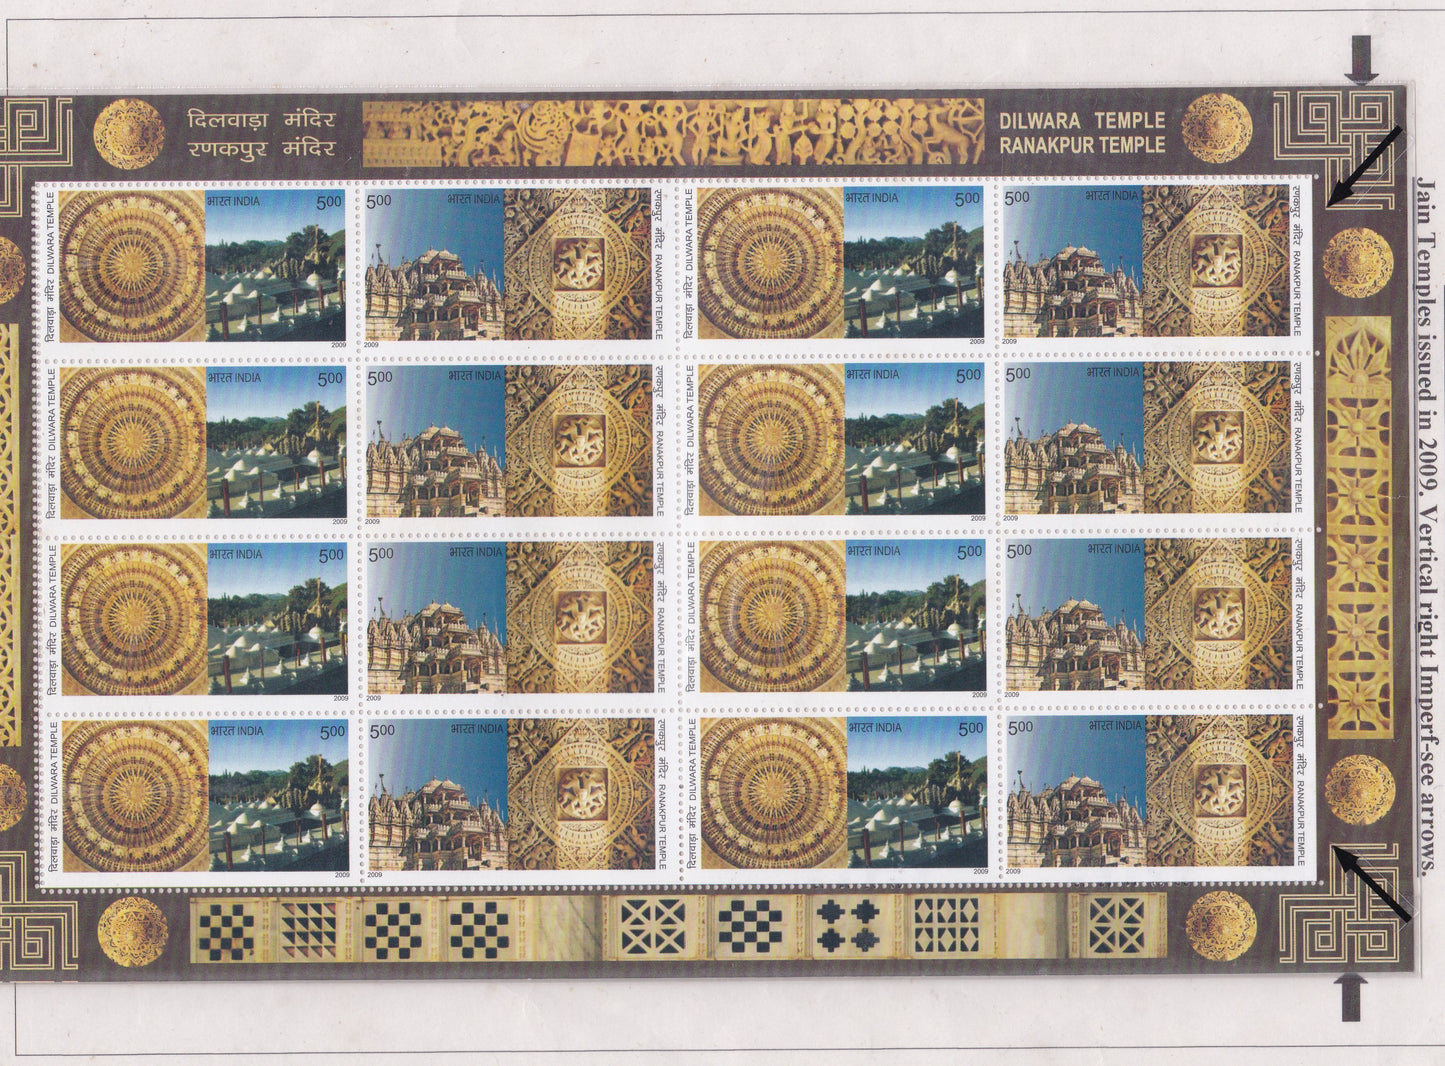 India-Jain Temples issued in 2009, Vertical Right Imperf sheetlet-- see arrows